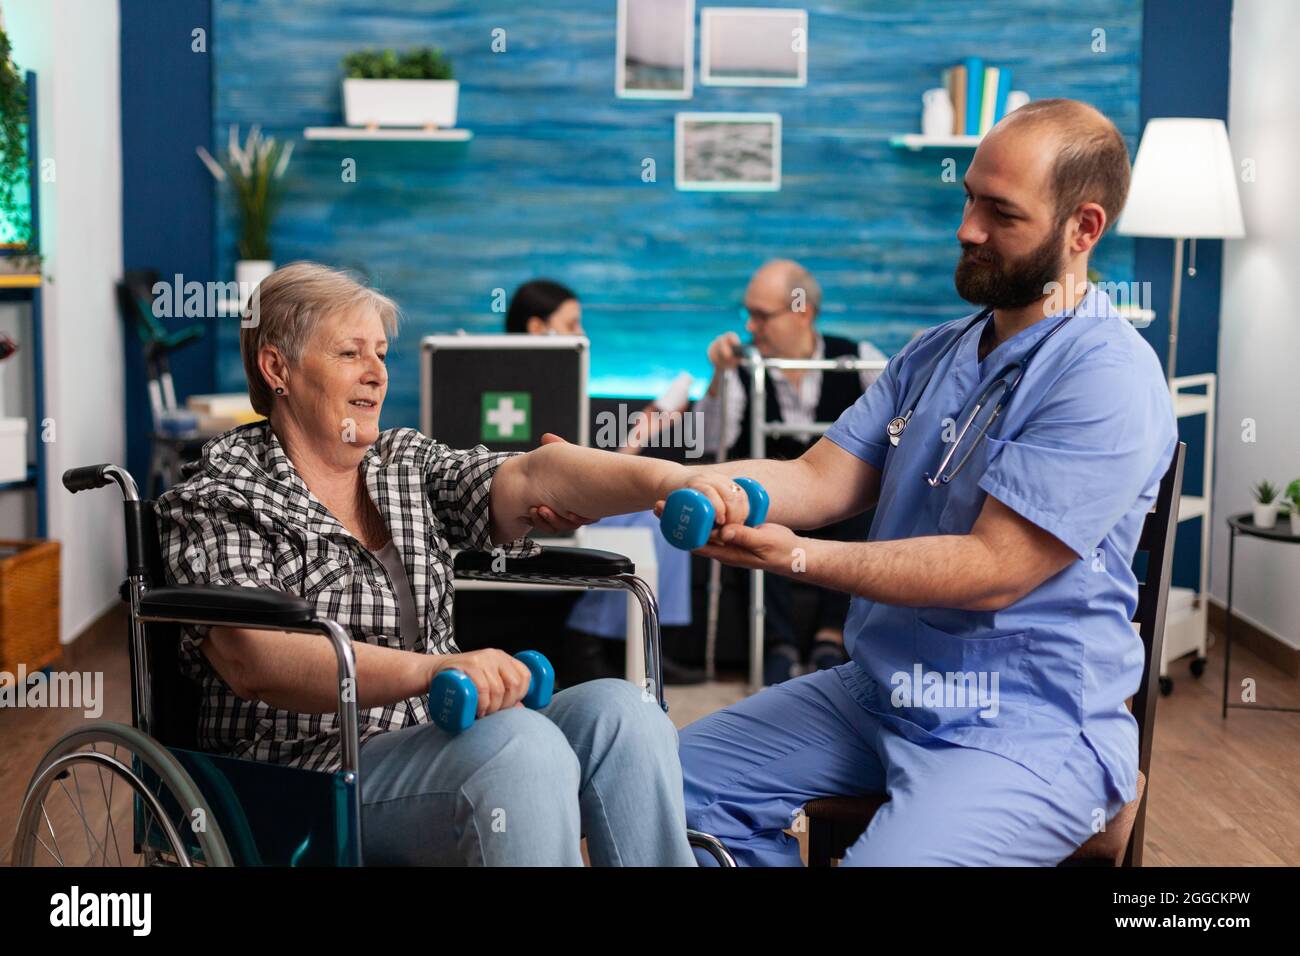 Male nurse helping senior retired disabled woman in wheelchair to rehabilitate using dumbbels during recovery session in nursing home. Elderly woman exercising physiotherapy with social worker Stock Photo